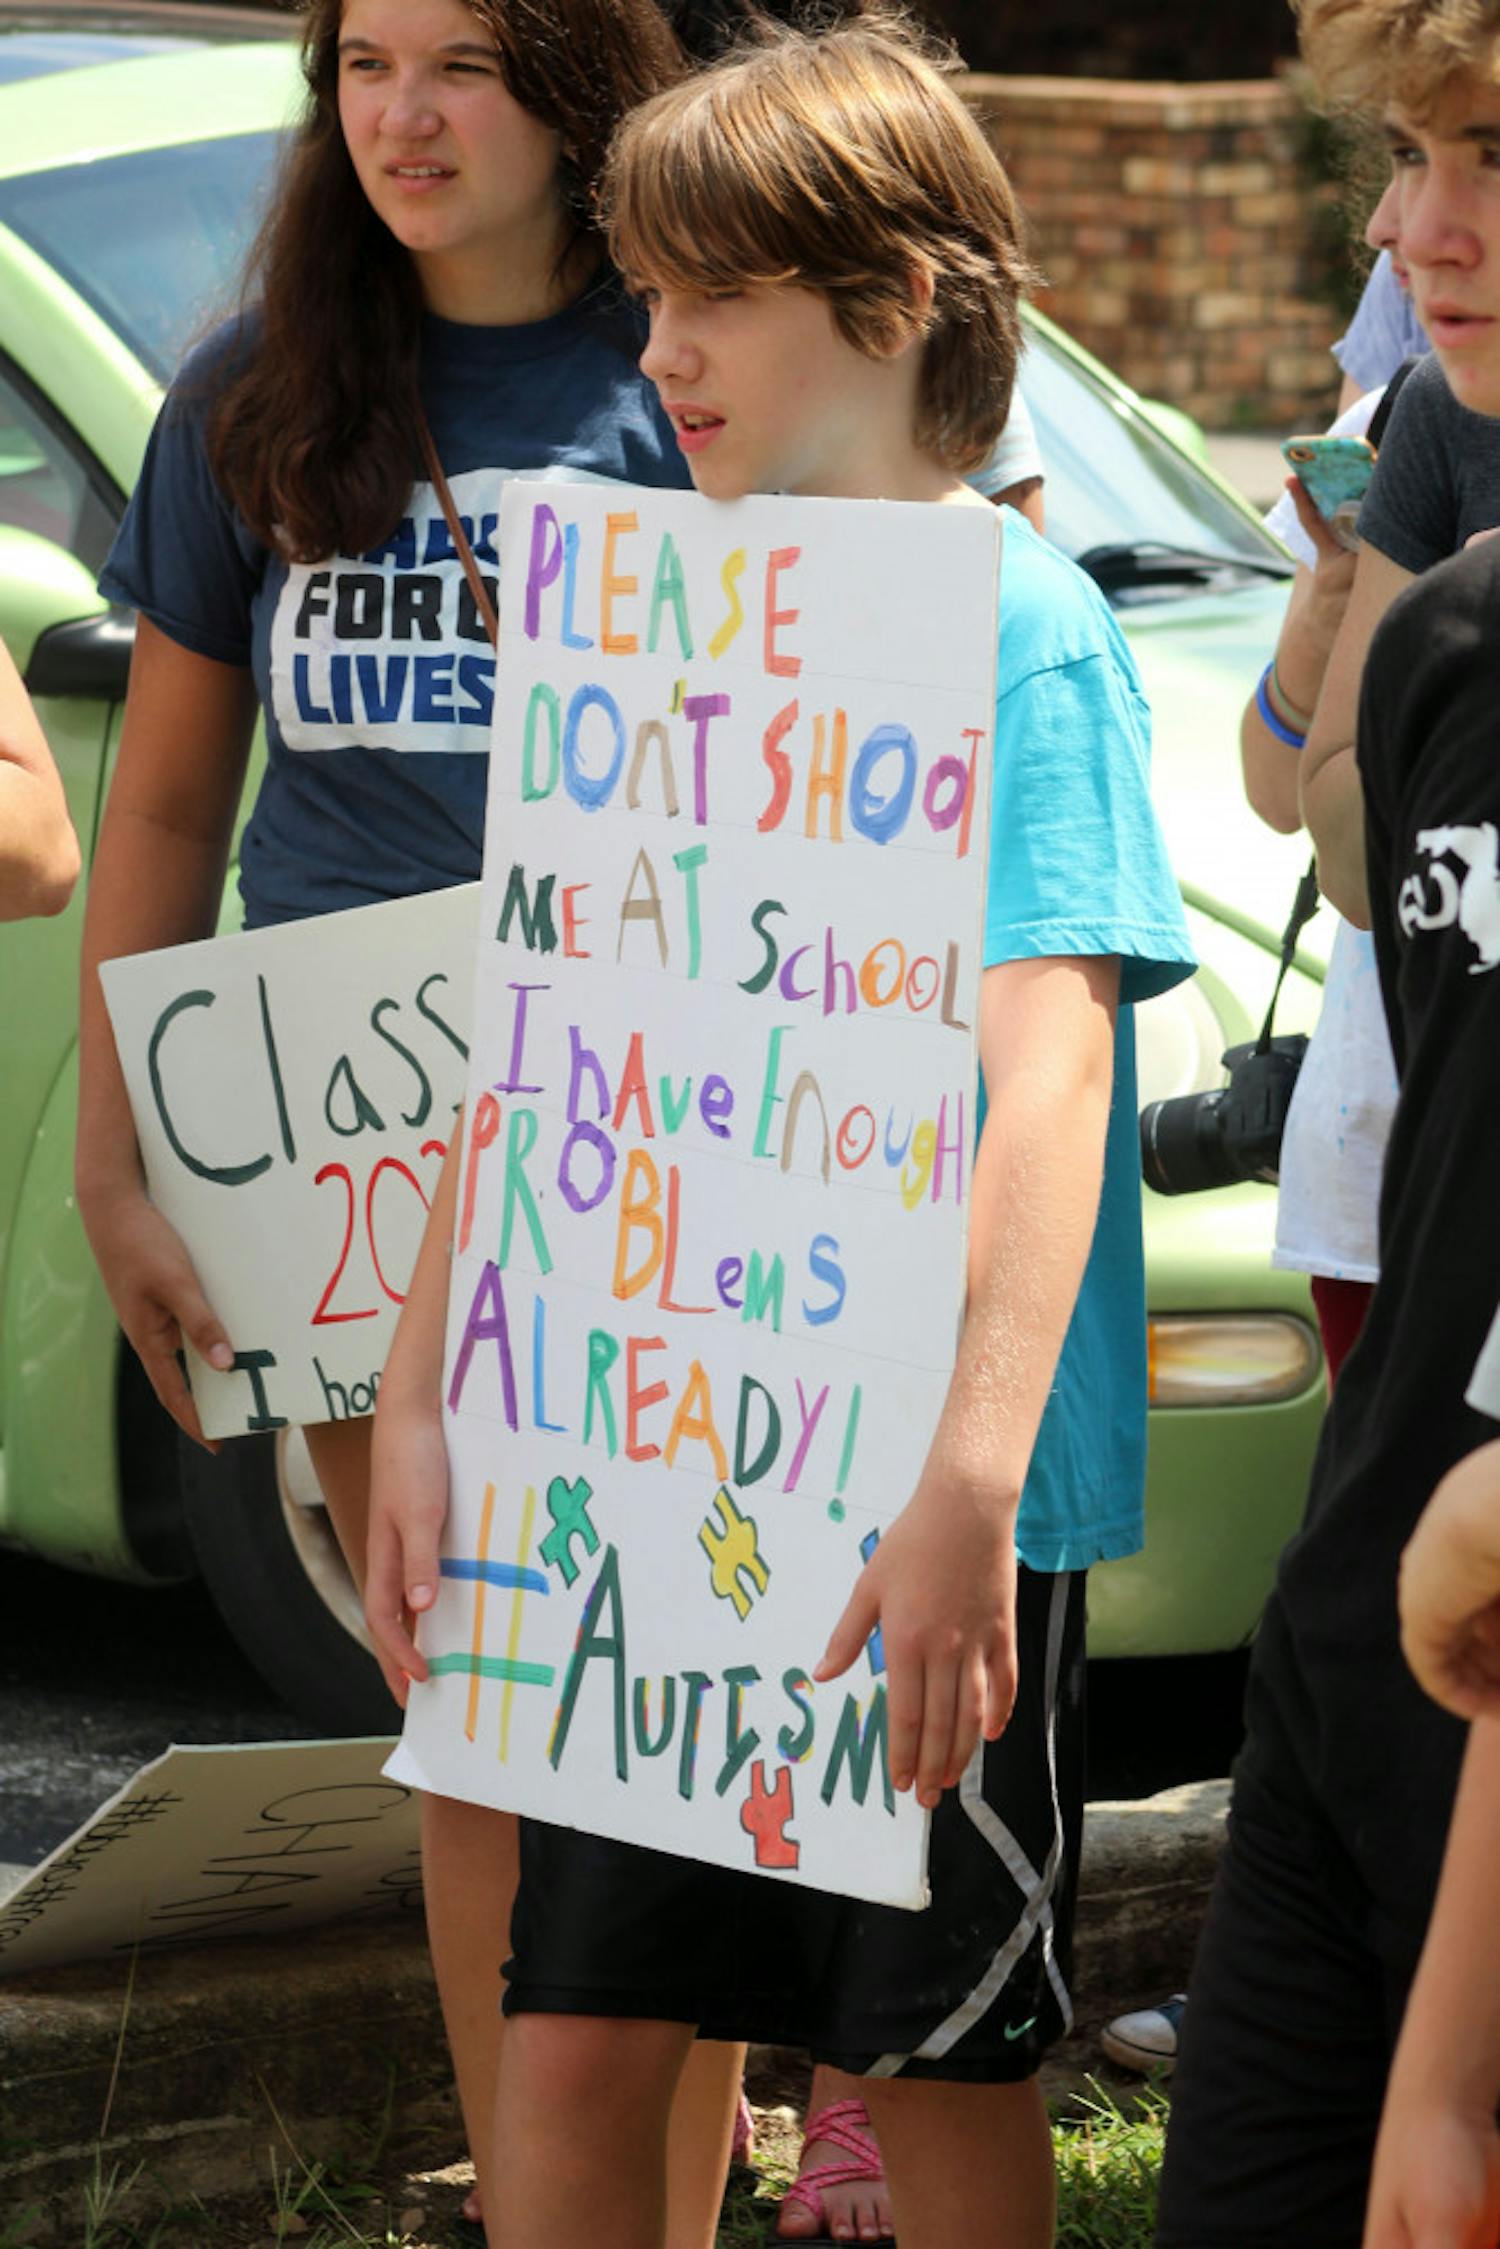 Children, students, and Gainesville residents rallied alongside survivors of the Parkland school shooting on July 26, 2018 at Congressman Ted Yoho's office.  The event was part of the MSD "Road to Change" tour in which students are calling for their local representatives to "say no" to the NRA.  